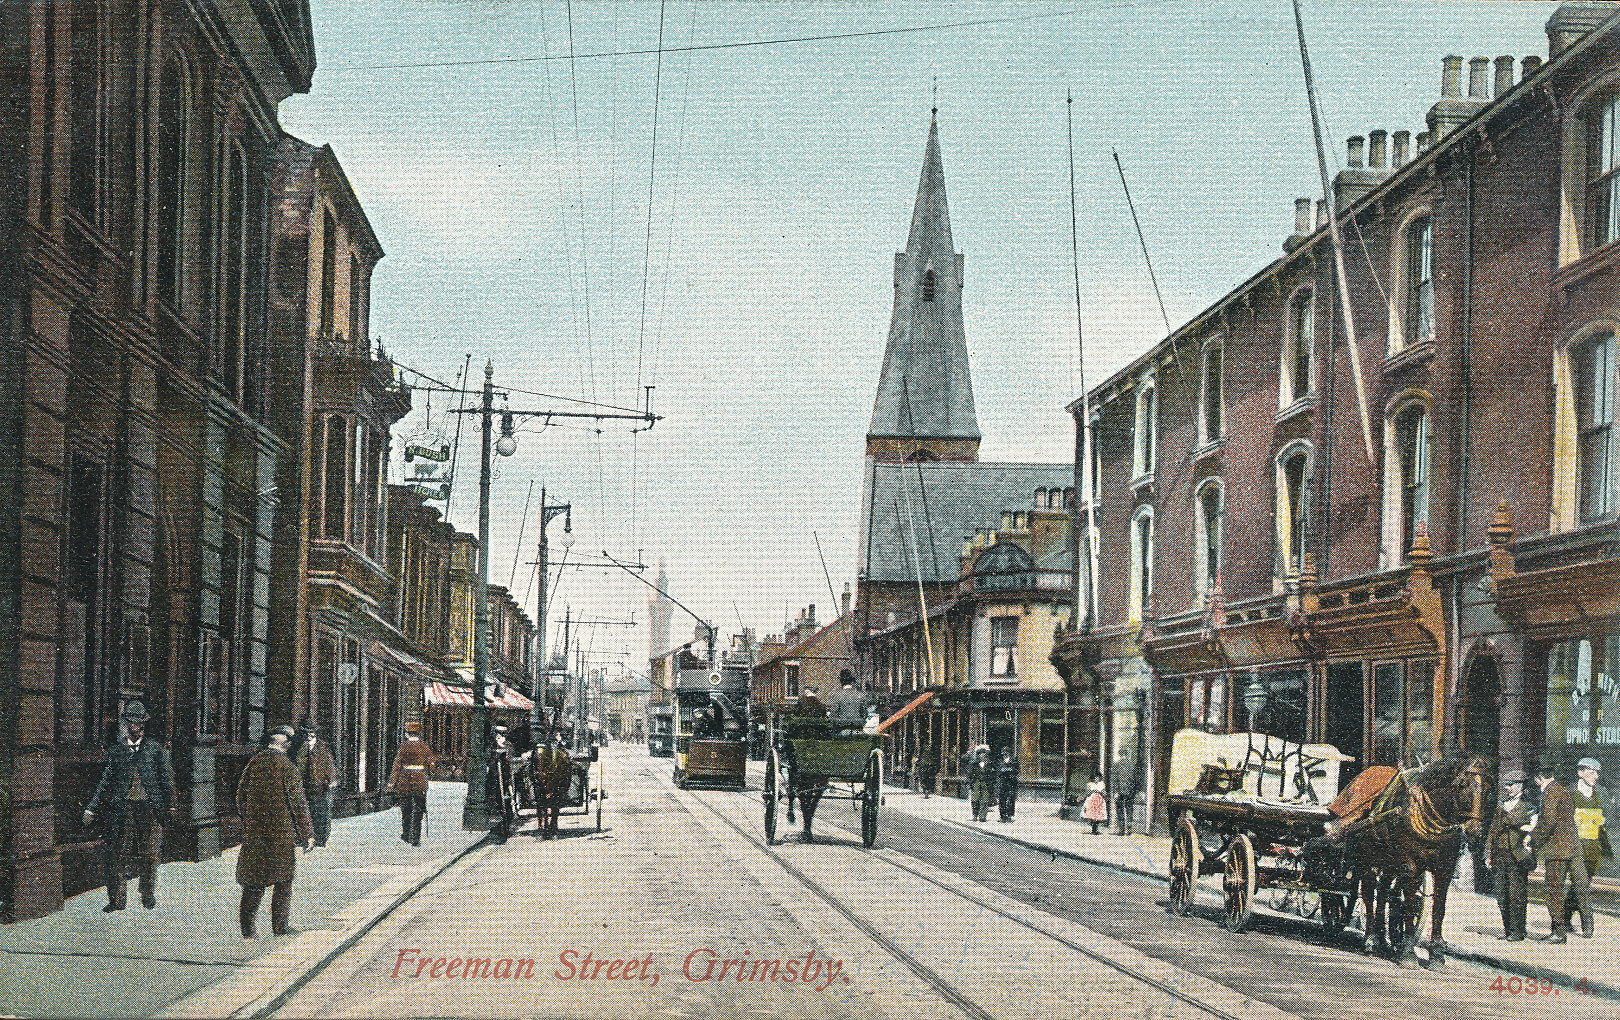 LINCOLNSHIRE, P2 onwards, inc Views, Buildings, Immingham Dock, Village and St. Sc. at Grimsby,